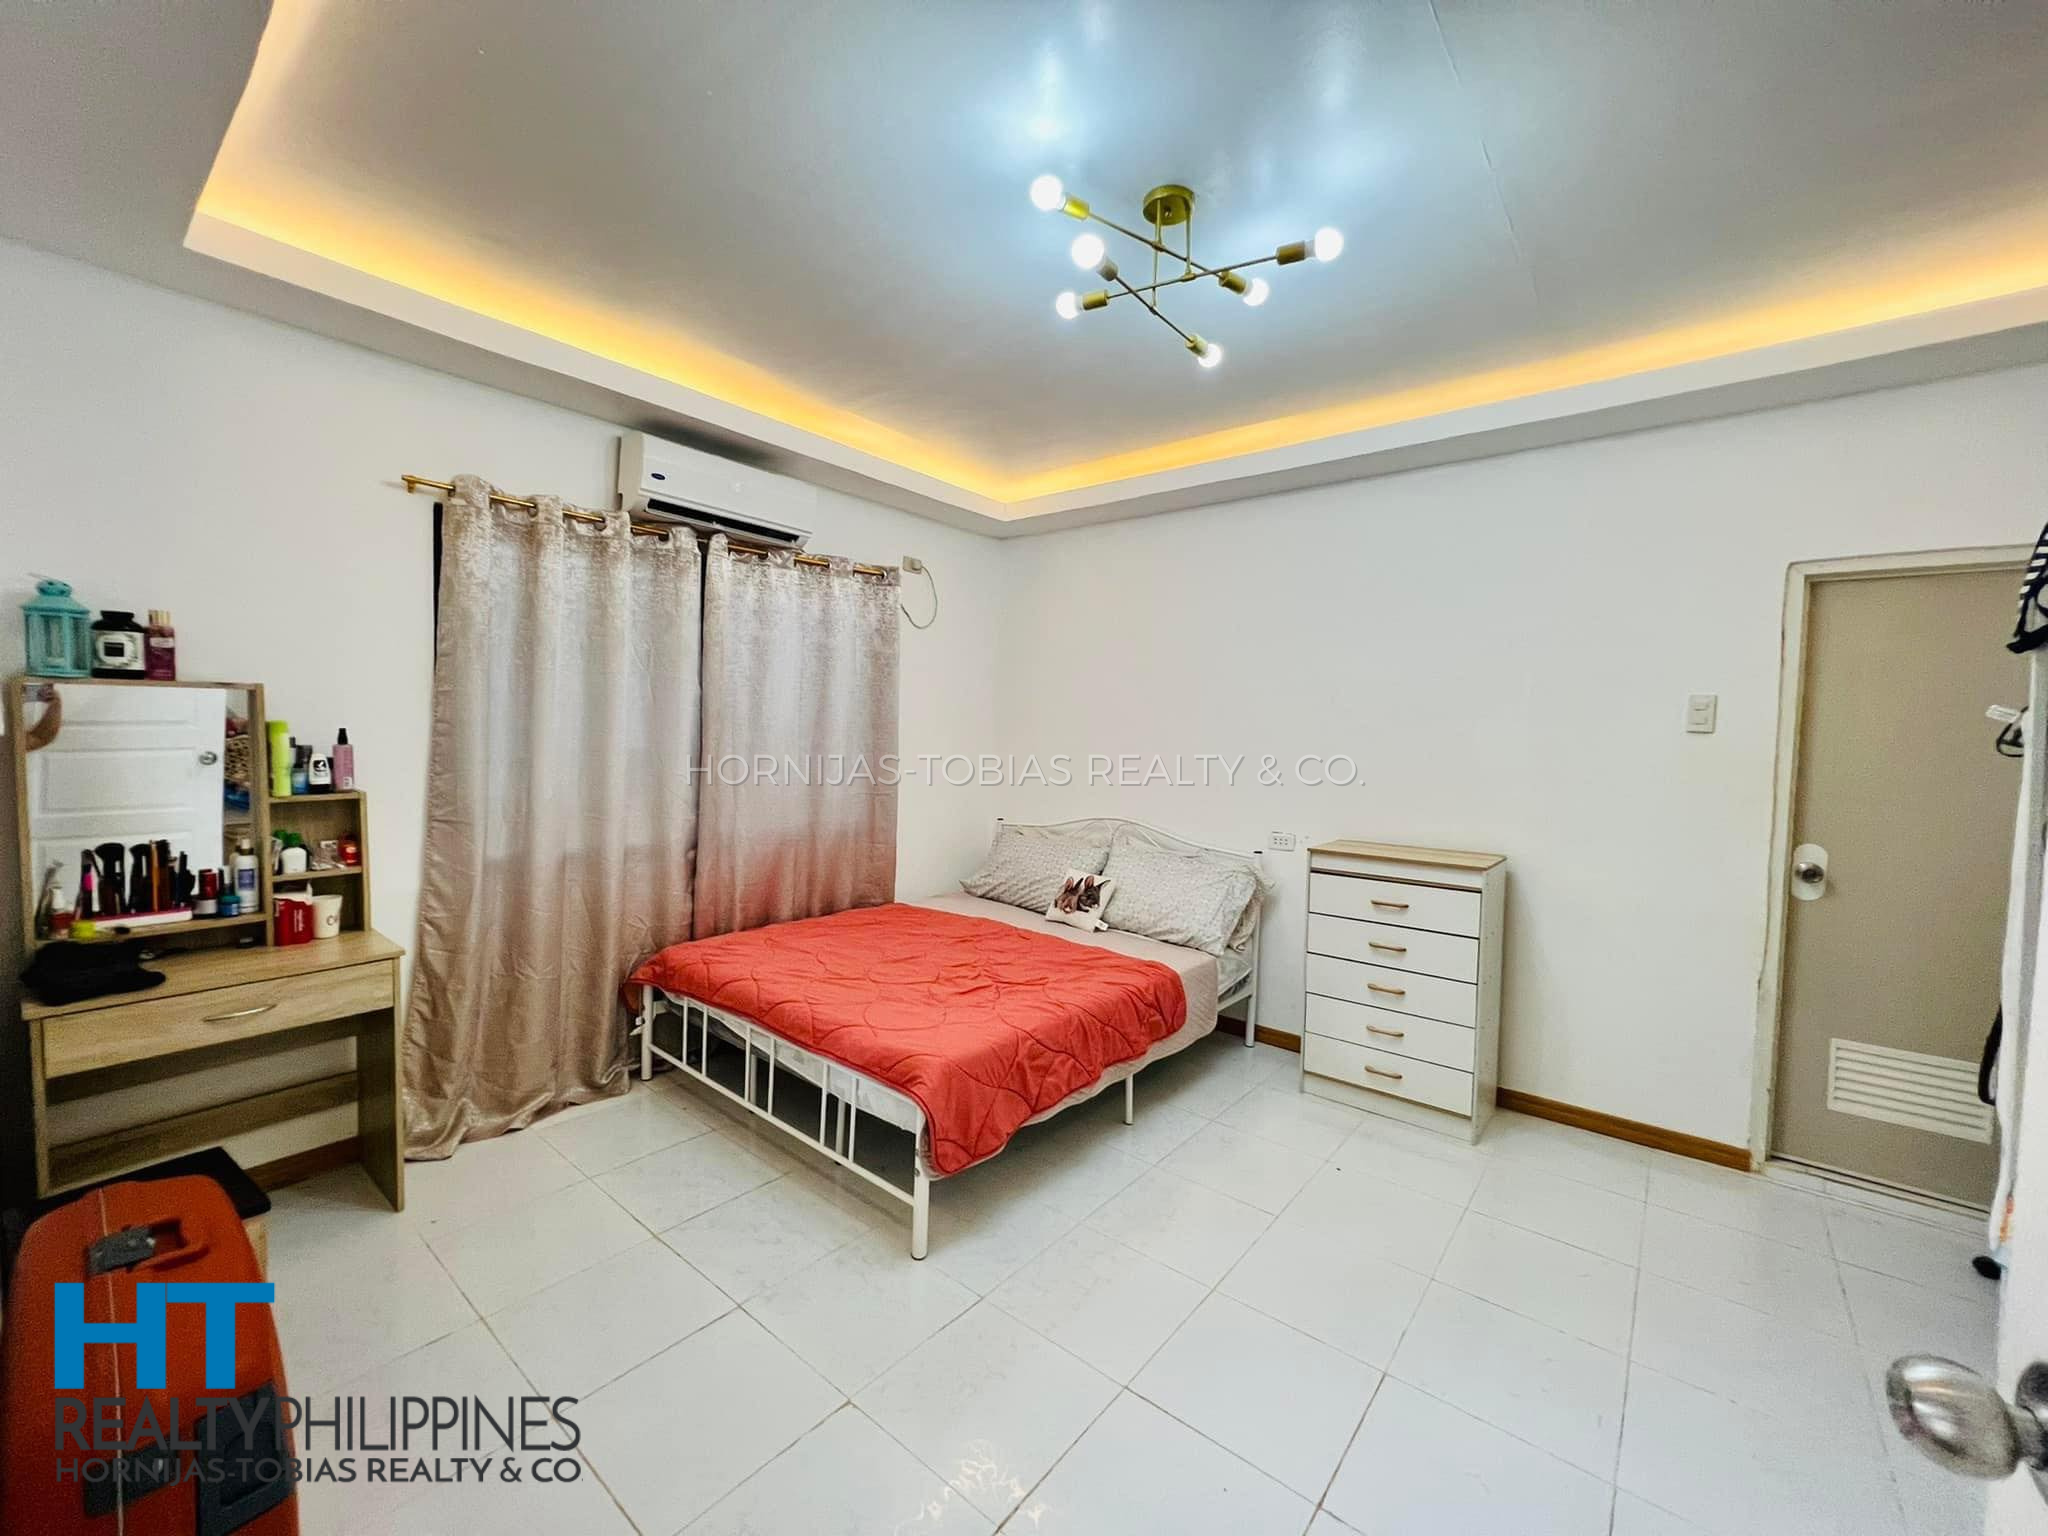 Bedroom - For Sale - Inland Resort and Rest House in Binugao, Toril, Davao City